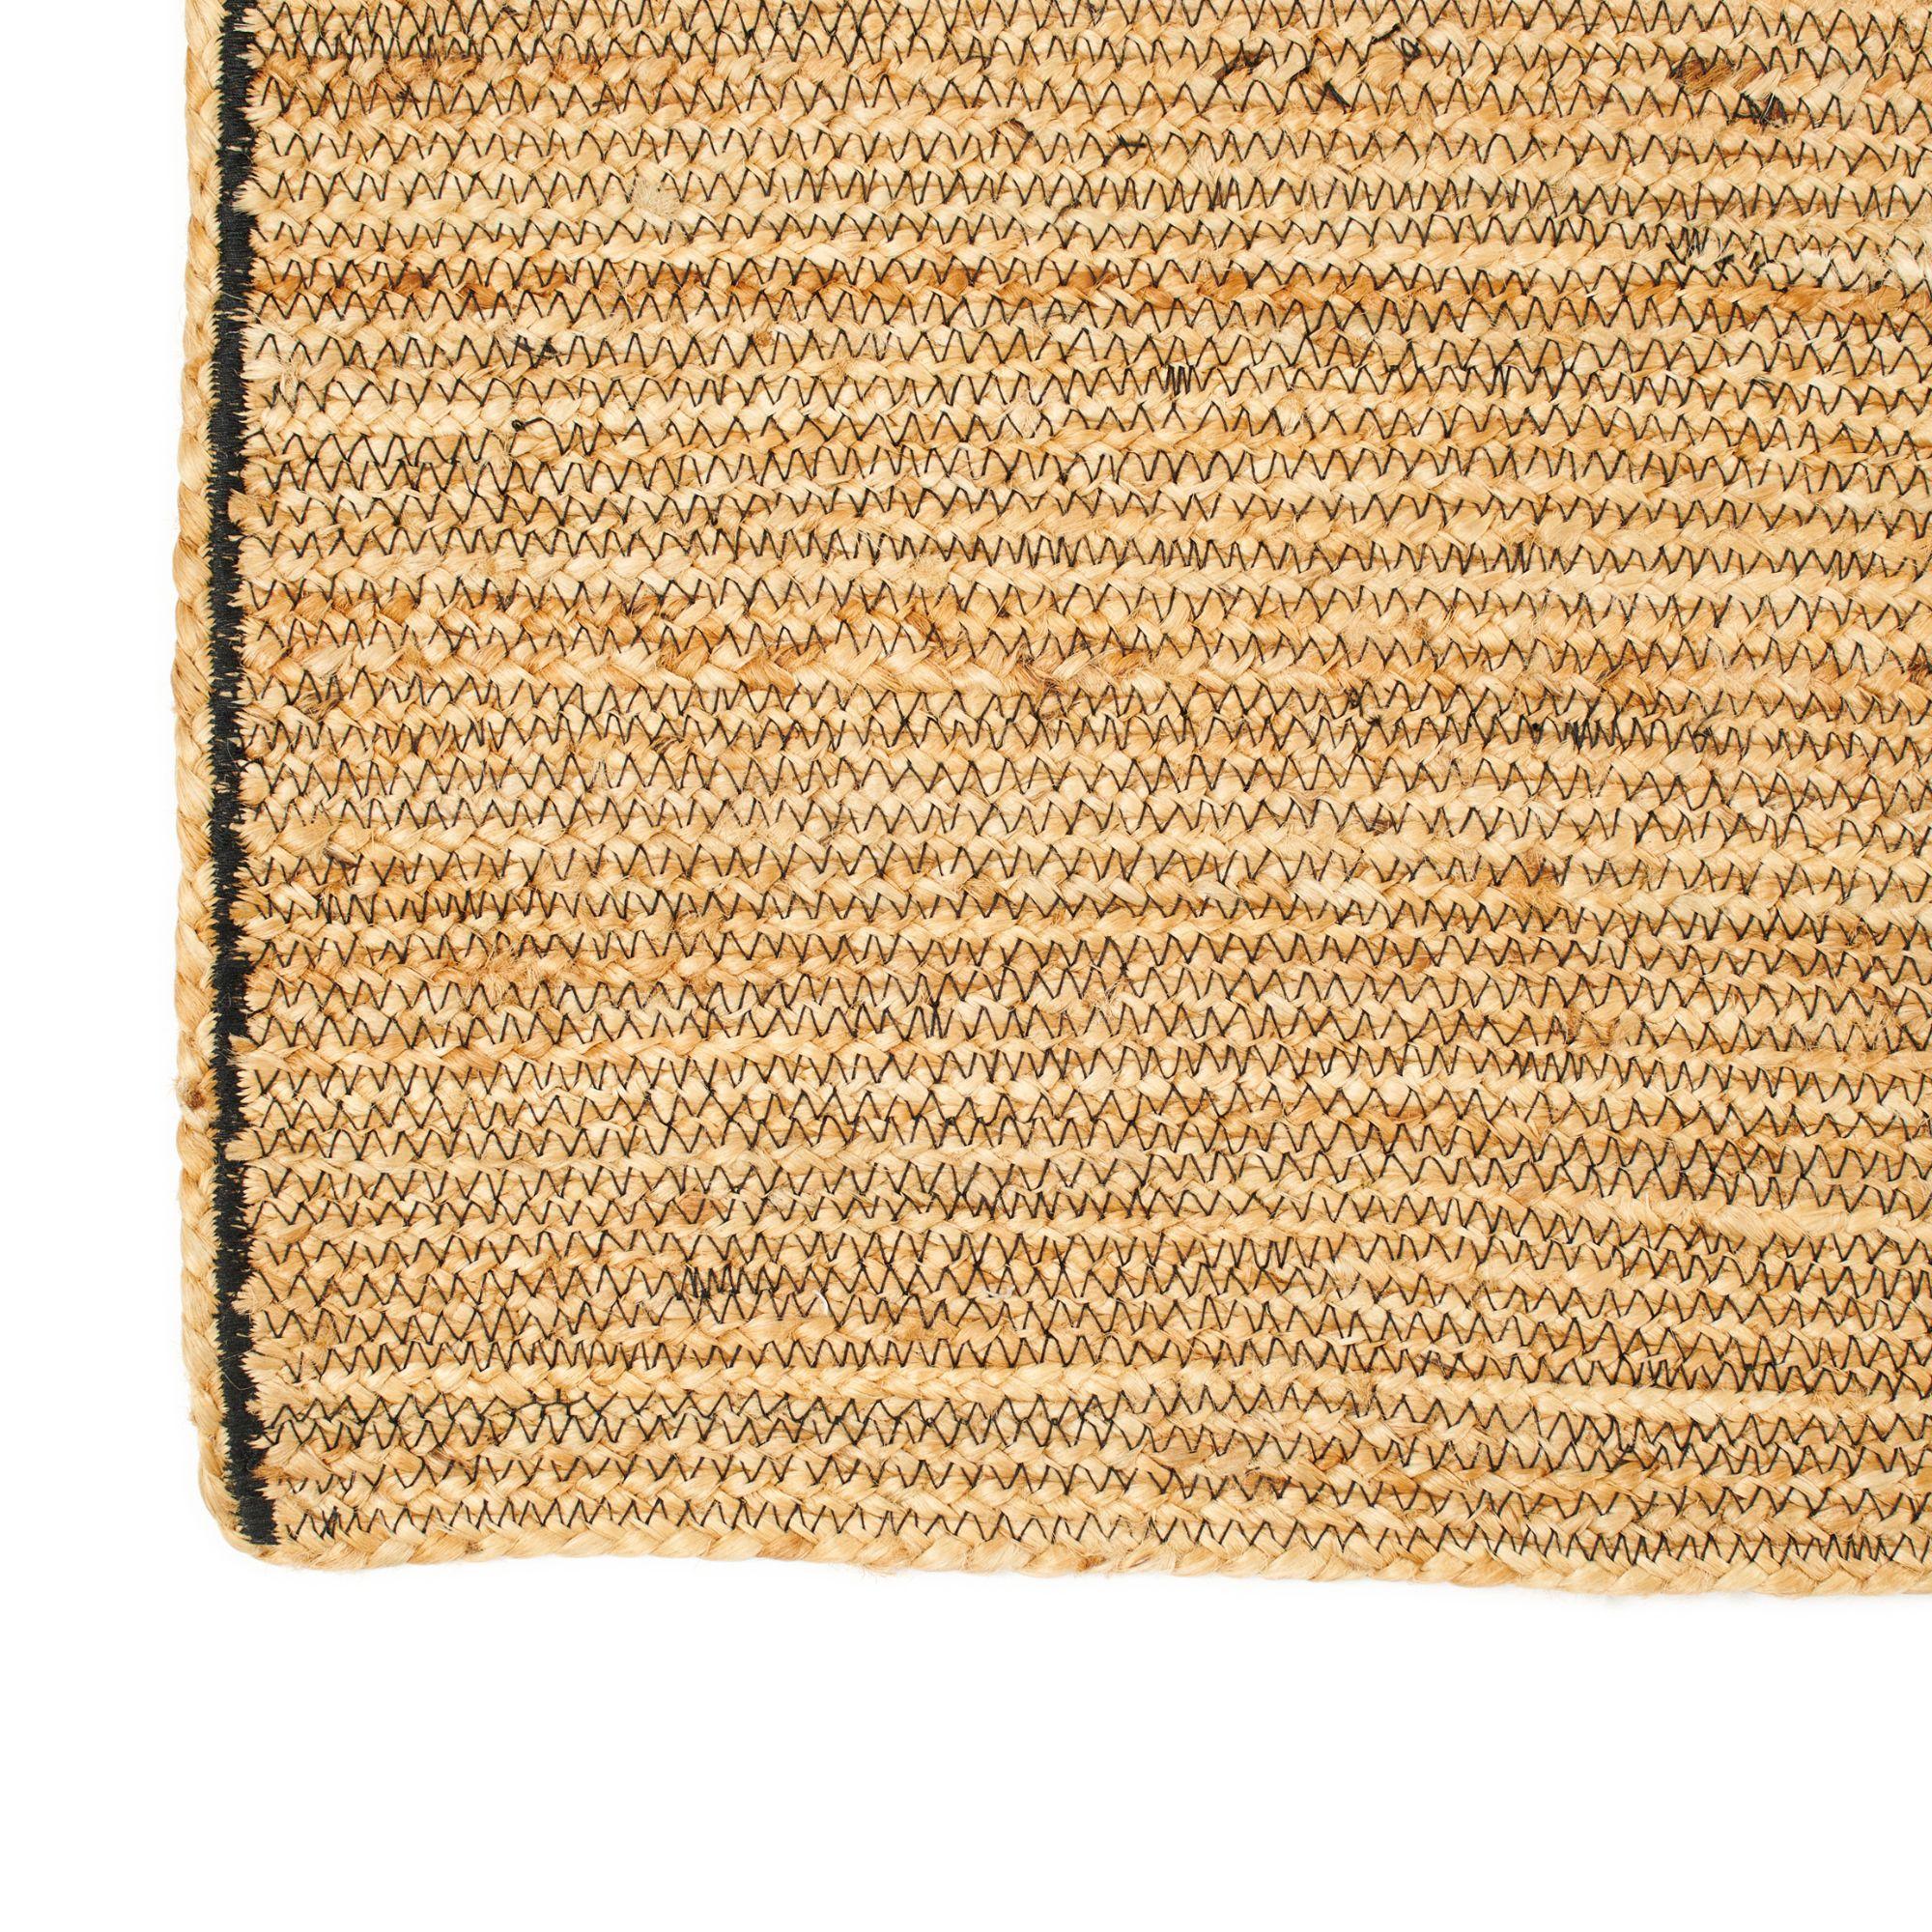 Tossa Jute Table Runner is a slightly textured and weighted runner. Natural fiber jute has been used to breathe life in this neutral style of runner. The beauty of this runner is in its pure design that stands out with the use of undyed yarns left